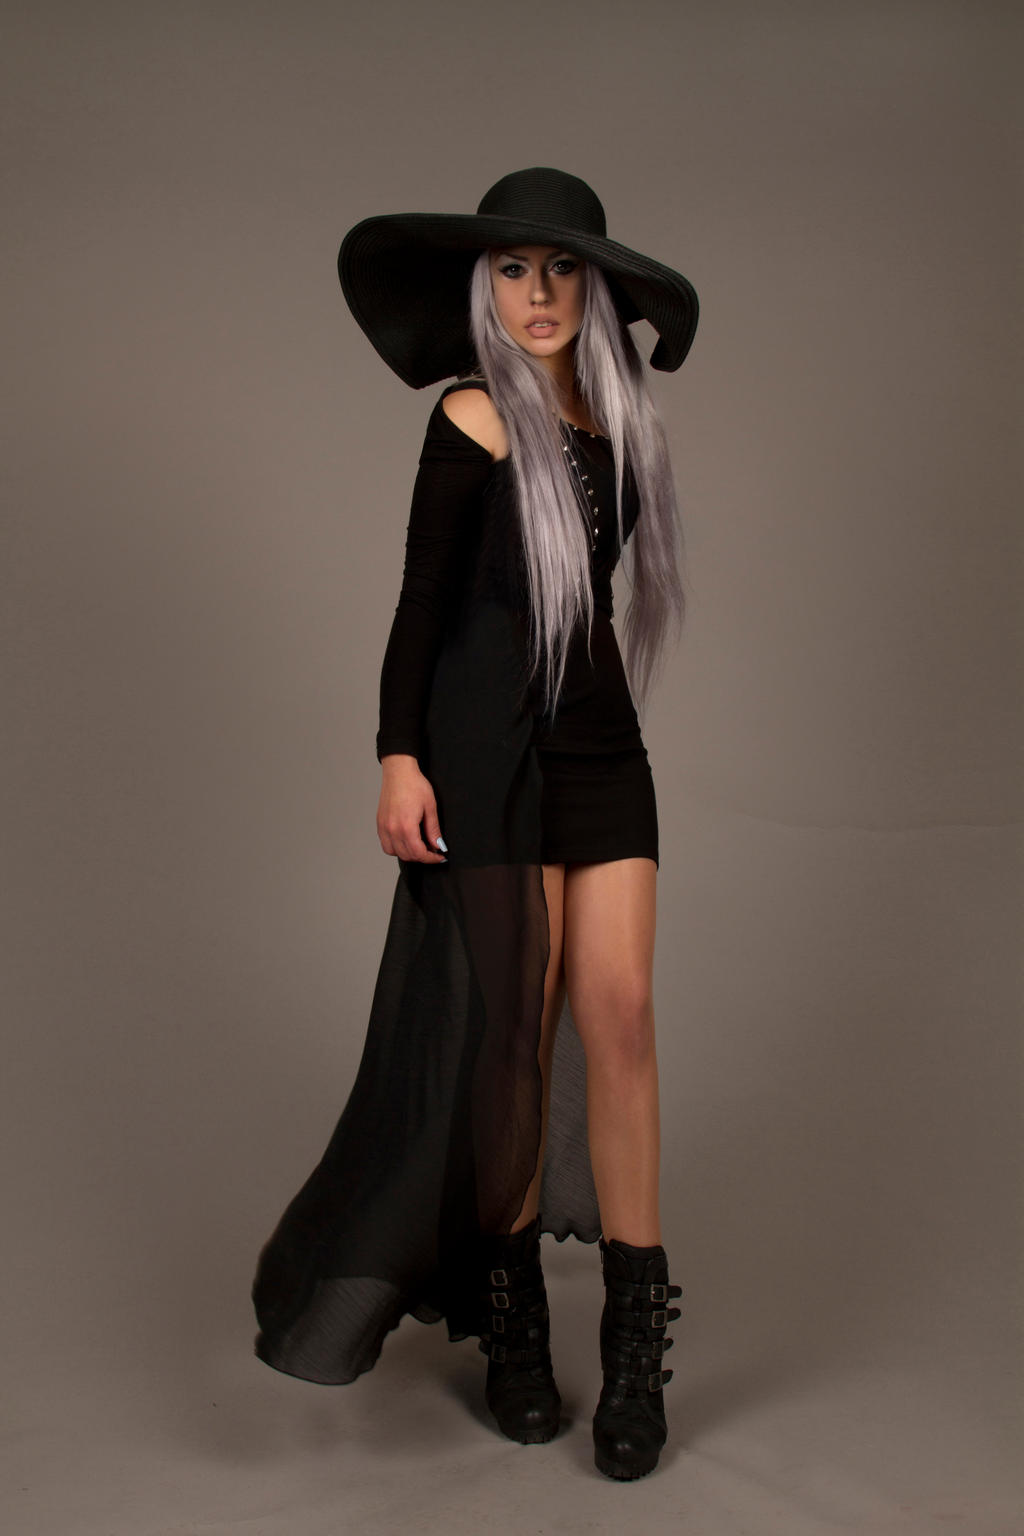 Modern Witch II by tanit-isis-stock on DeviantArt